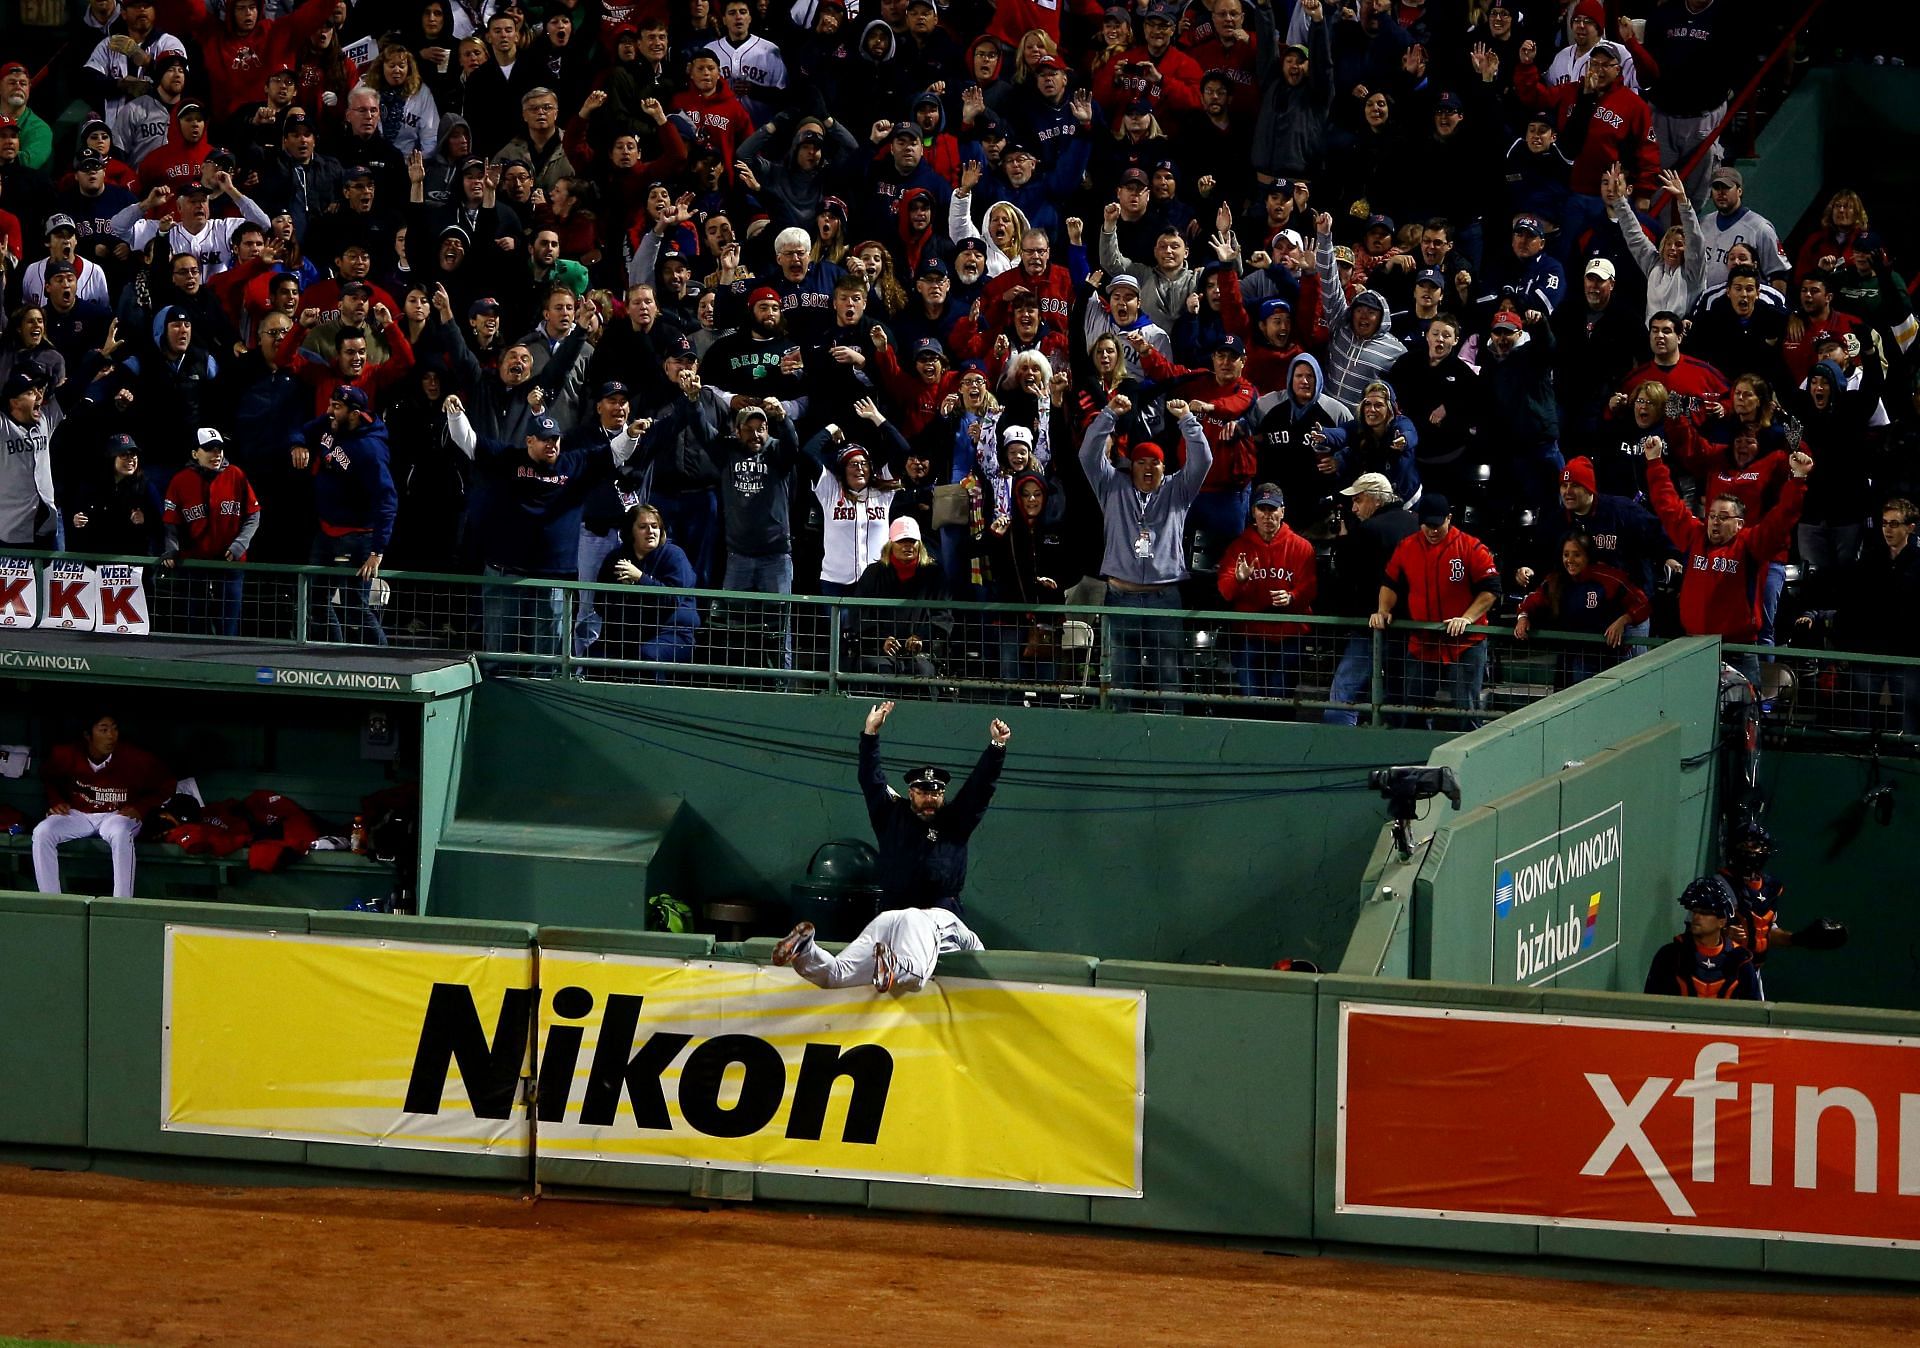 David Ortiz is the best home run trotter of all time. Here's why.